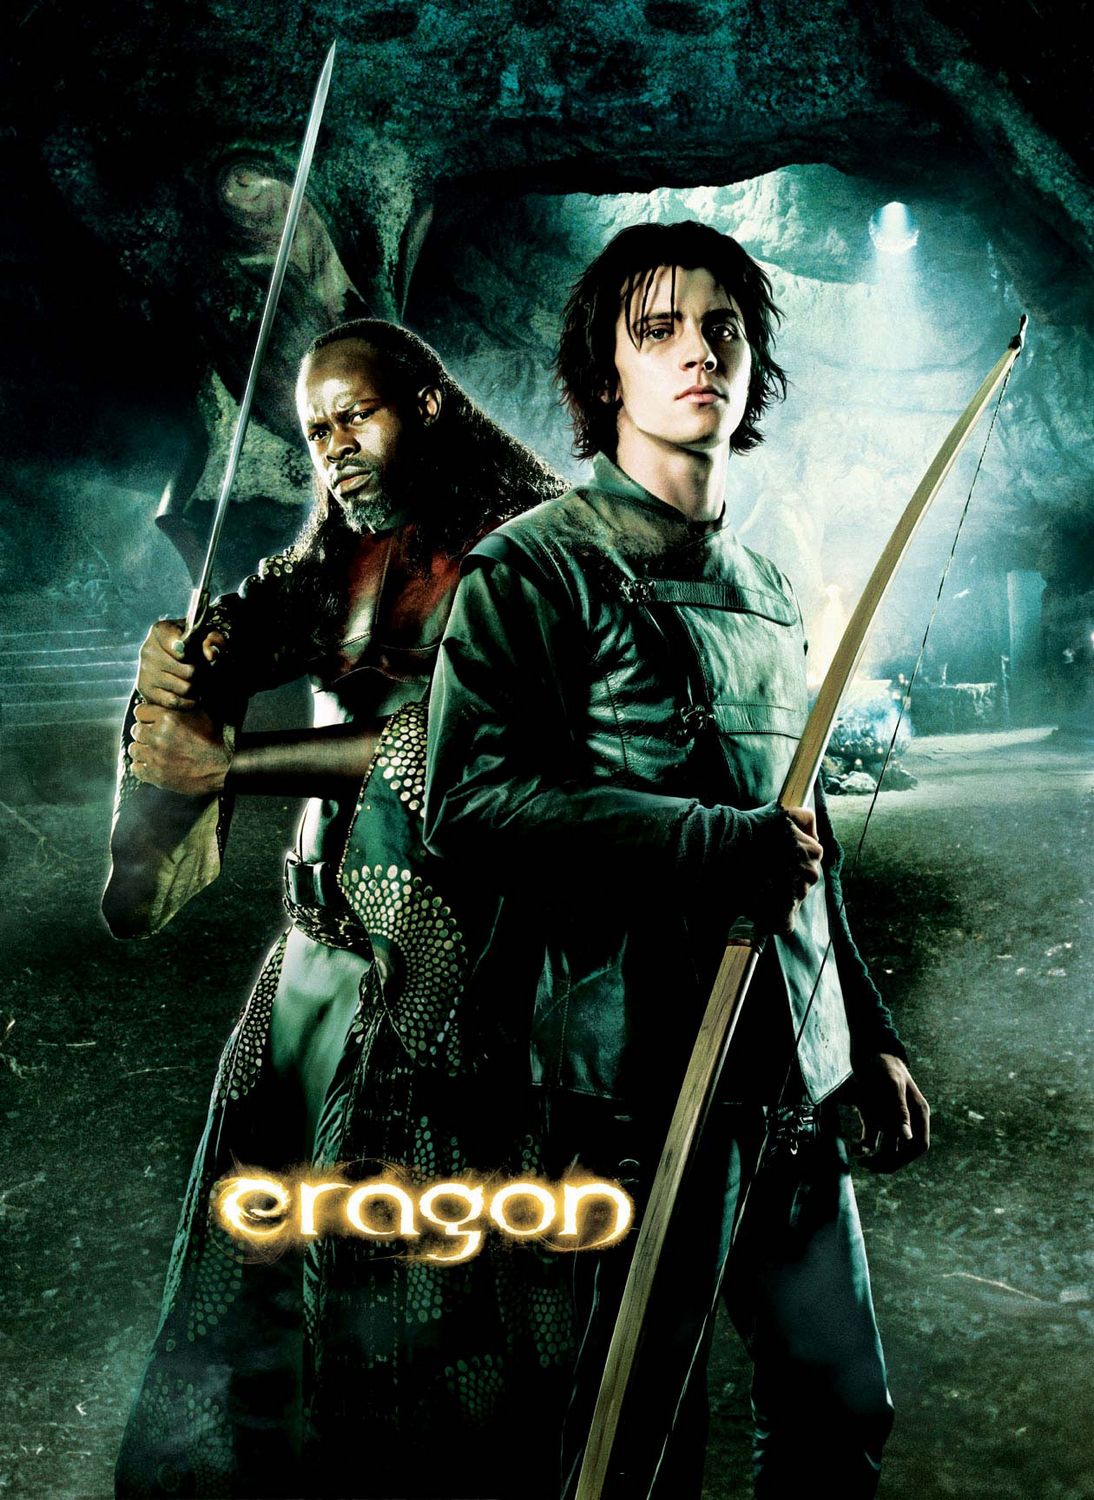 Extra Large Movie Poster Image for Eragon (#10 of 11)